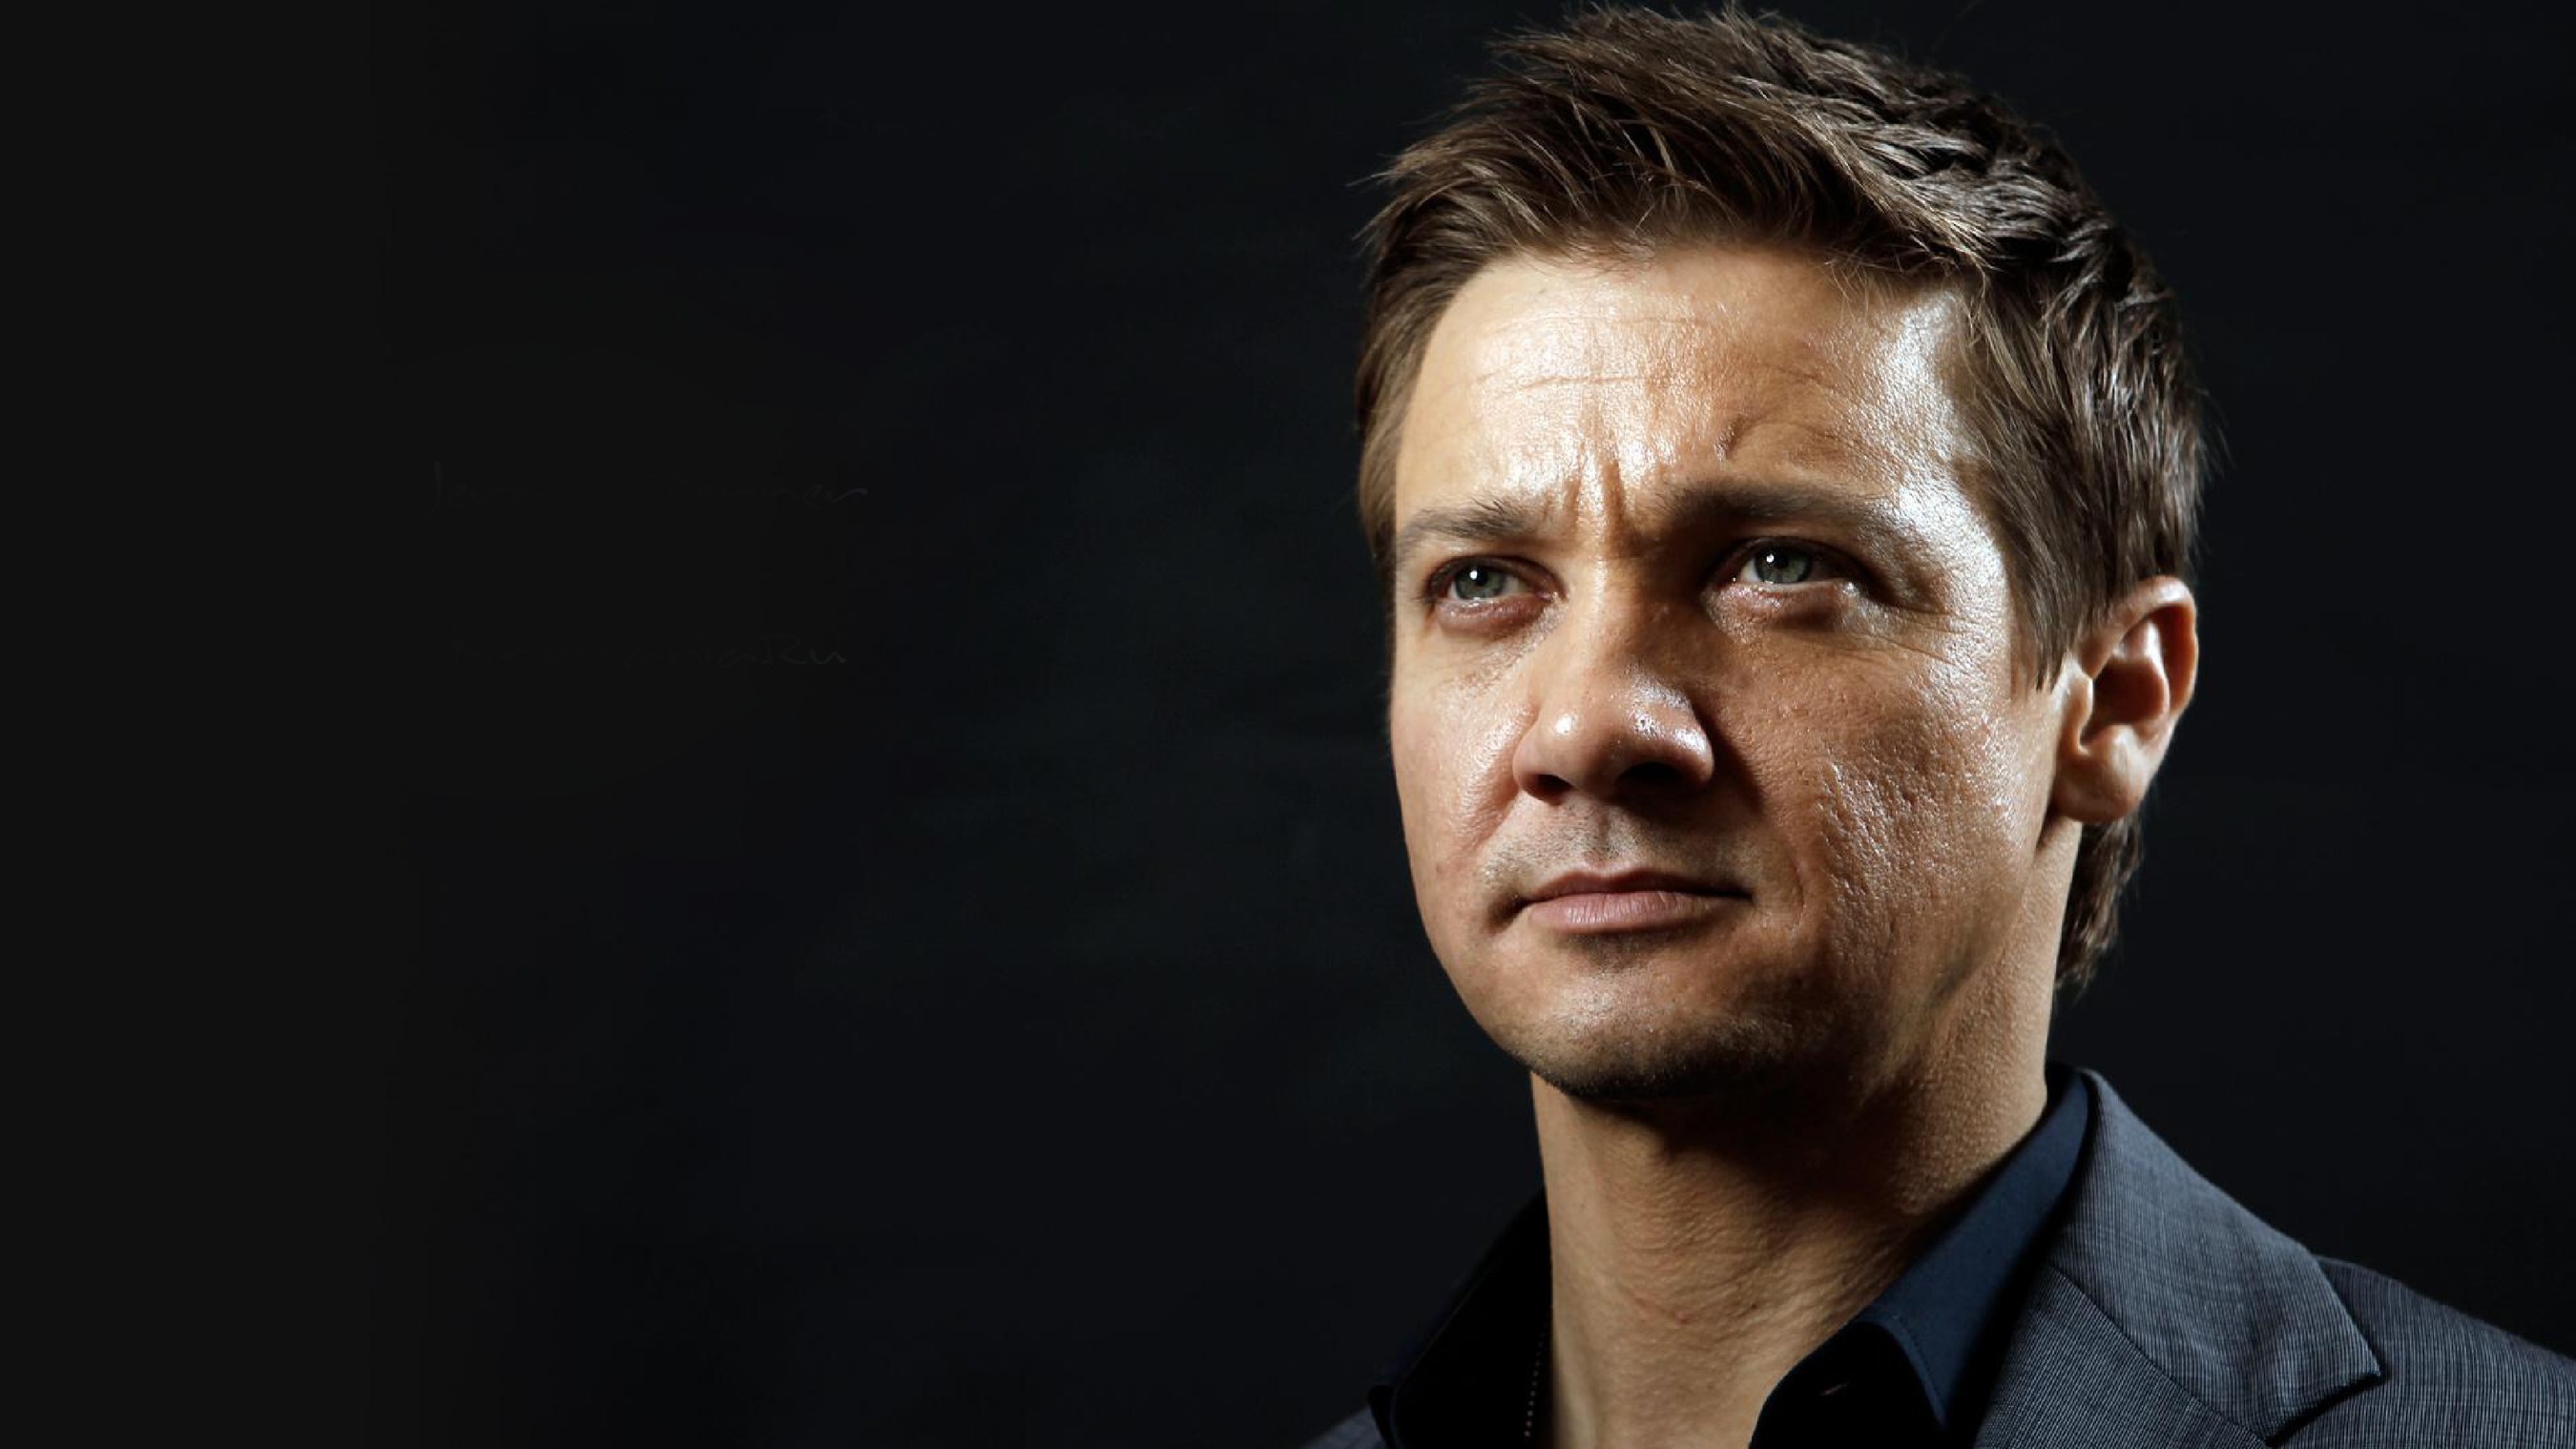 American Actor/Film Producer and two-time Academy Award nominee Jeremy Renner, Avenger's Hawkeye, emcees event of the century (10/22) and makes Team Kids debut to inspire kids as heroes at Oakley World HQ